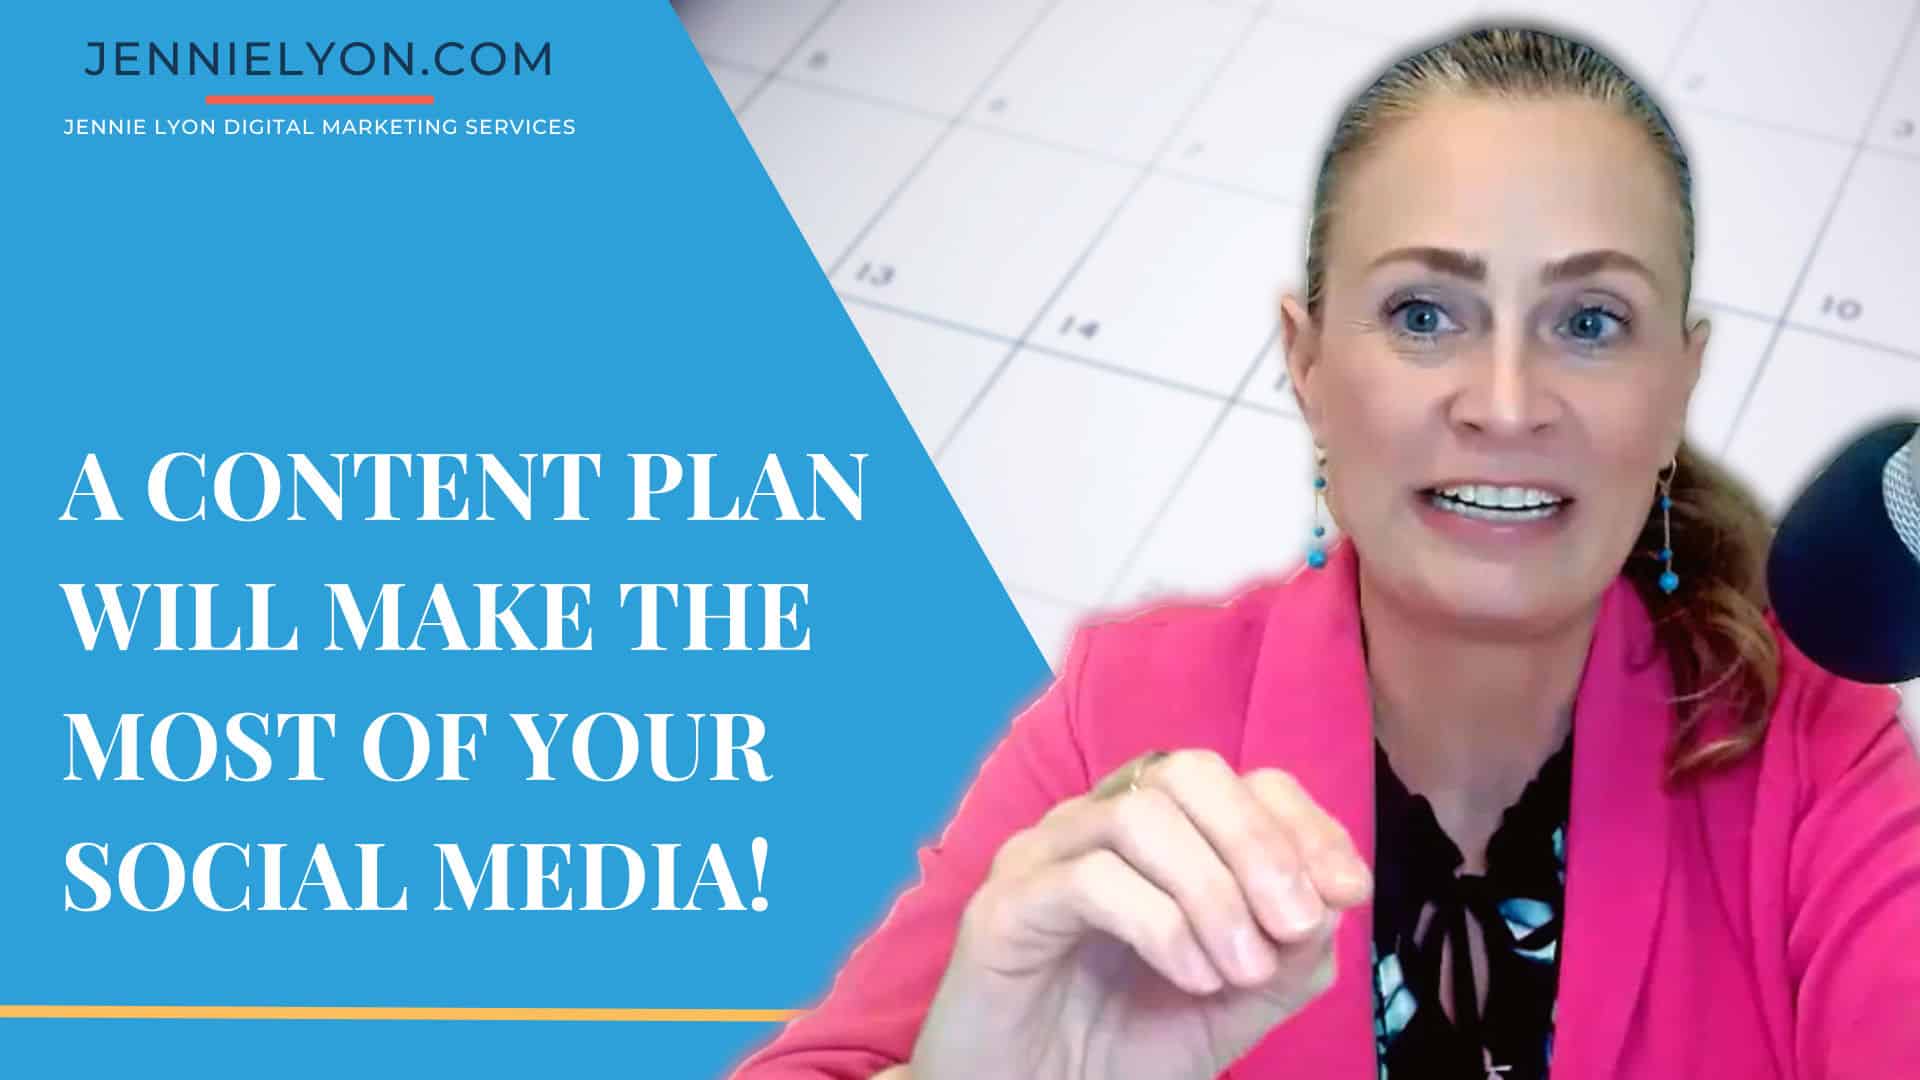 A Content Plan Will Make the Most of Your Social Media